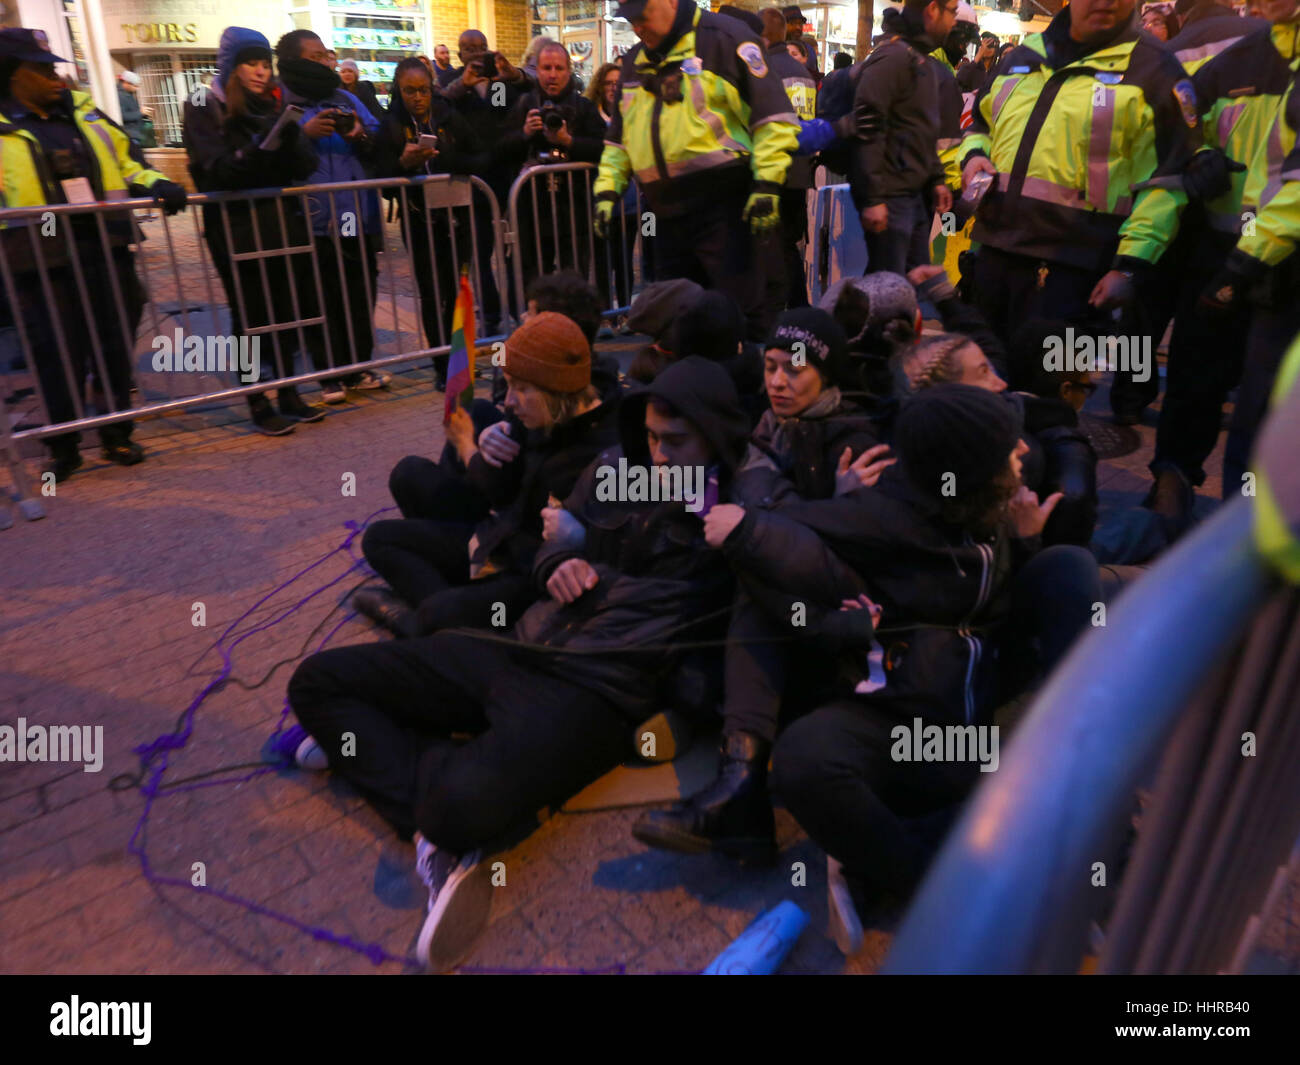 Washington DC, USA. January 20, 2017. Protesters organized under the group Code Pink use direct action techniques--locking arms---stop people from entering a security checkpoint on their way to watch the Inaugural Parade. The group was one of several simultaneous actions designed to deter access to the Inaugural Parade. Stock Photo